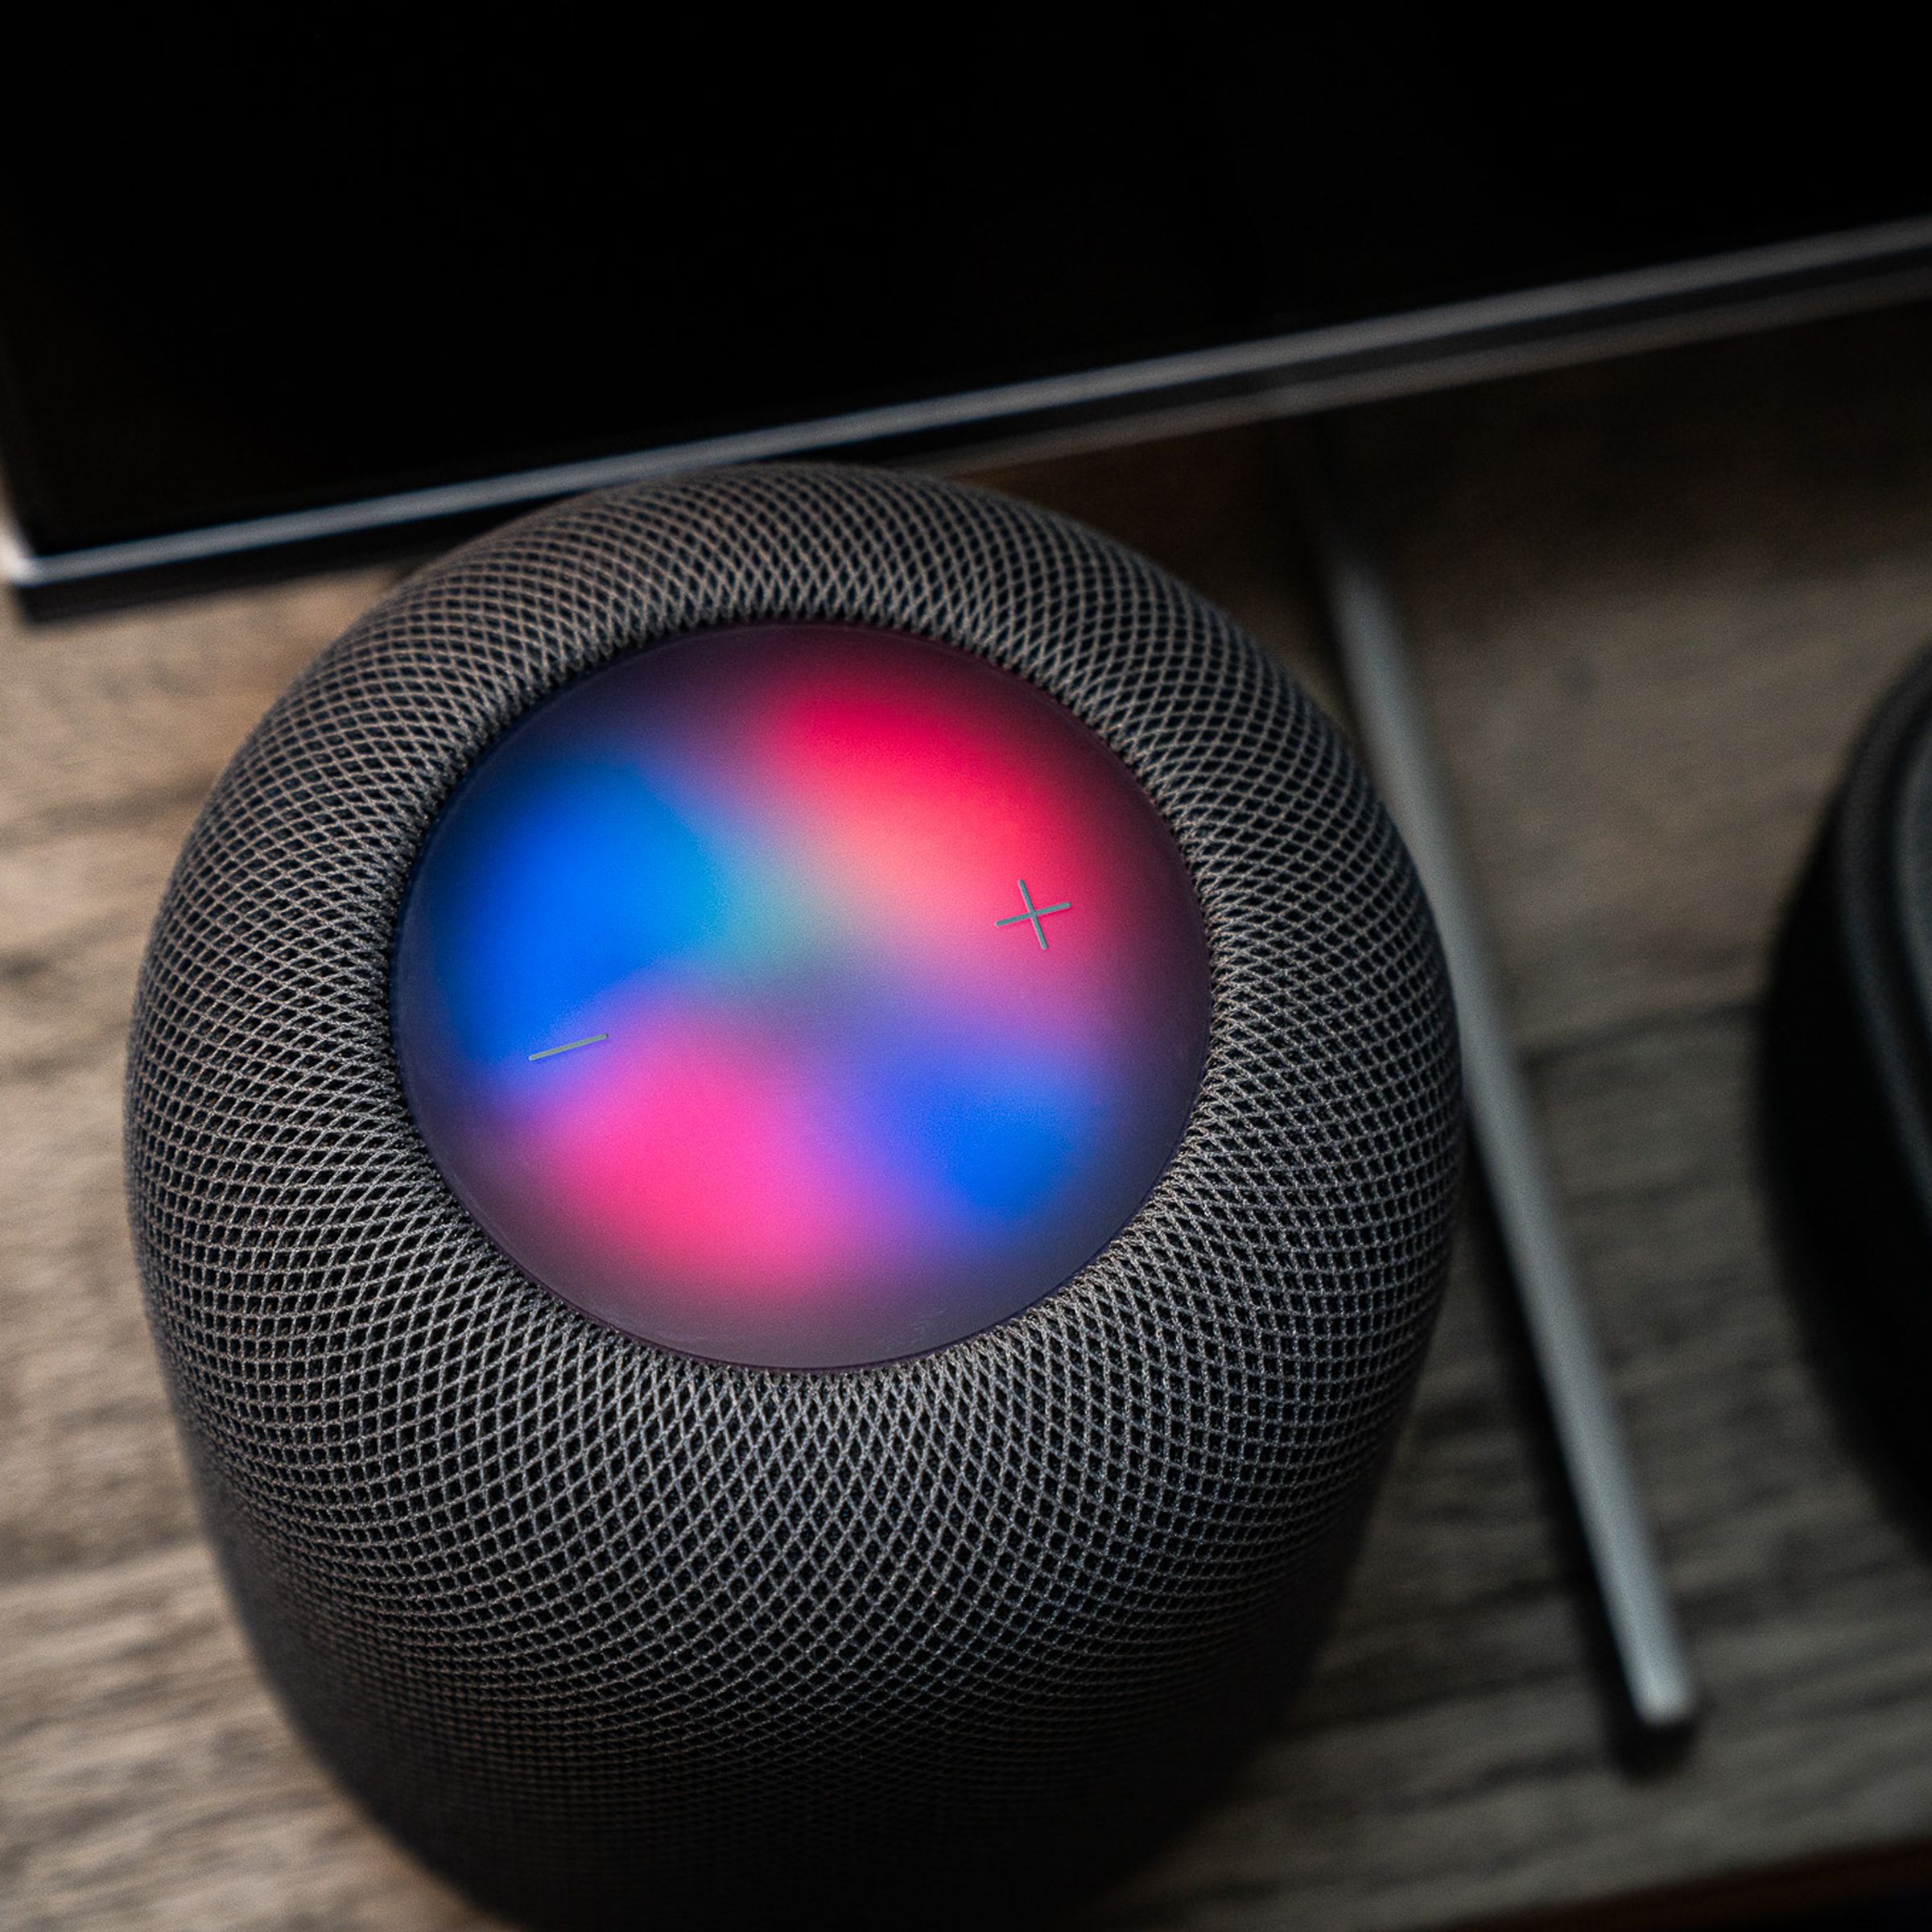 A photo of animations on Apple’s second-generation HomePod.